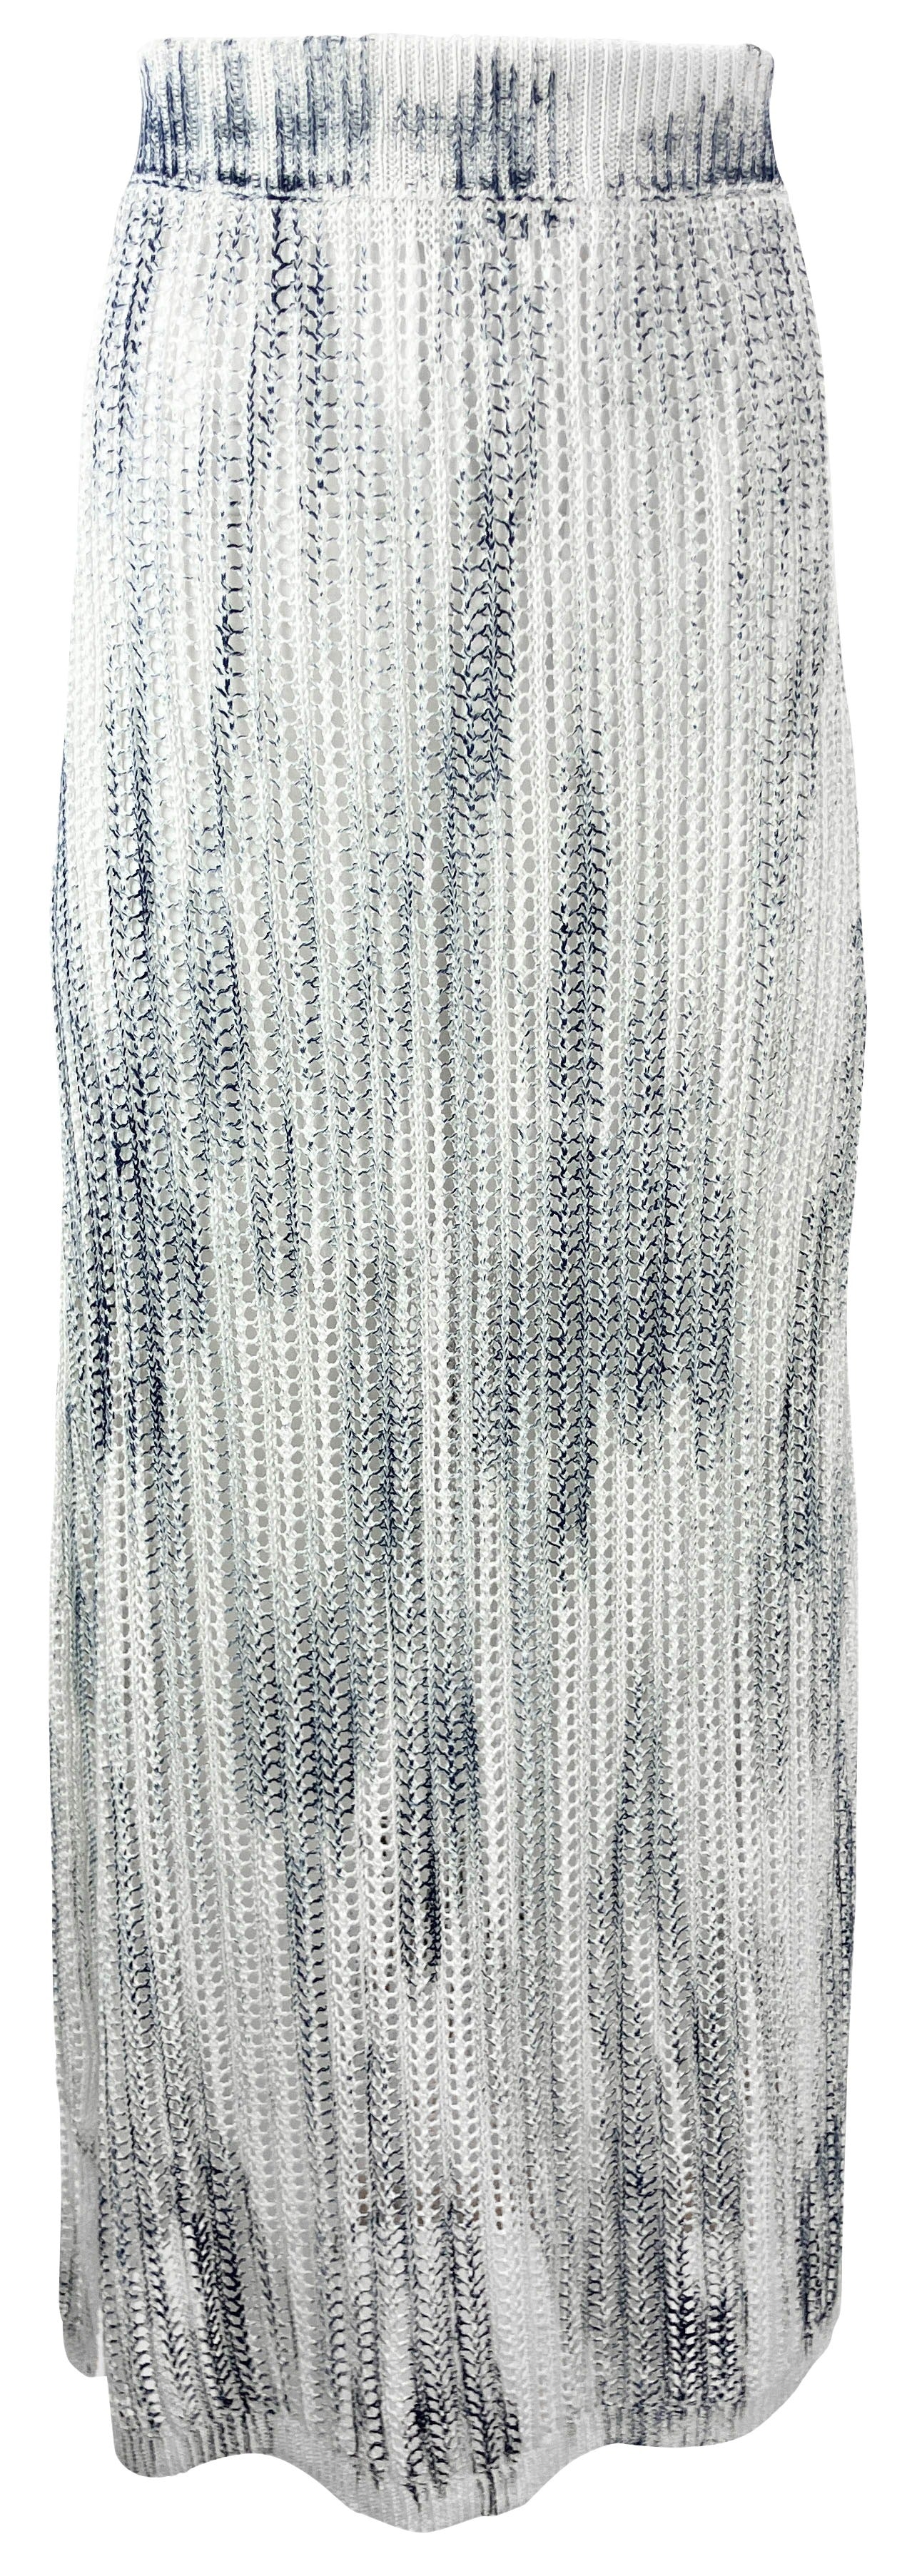 Avant Toi Ribbed Linen Skirt in White and Blue - Discounts on Avant Toi at UAL